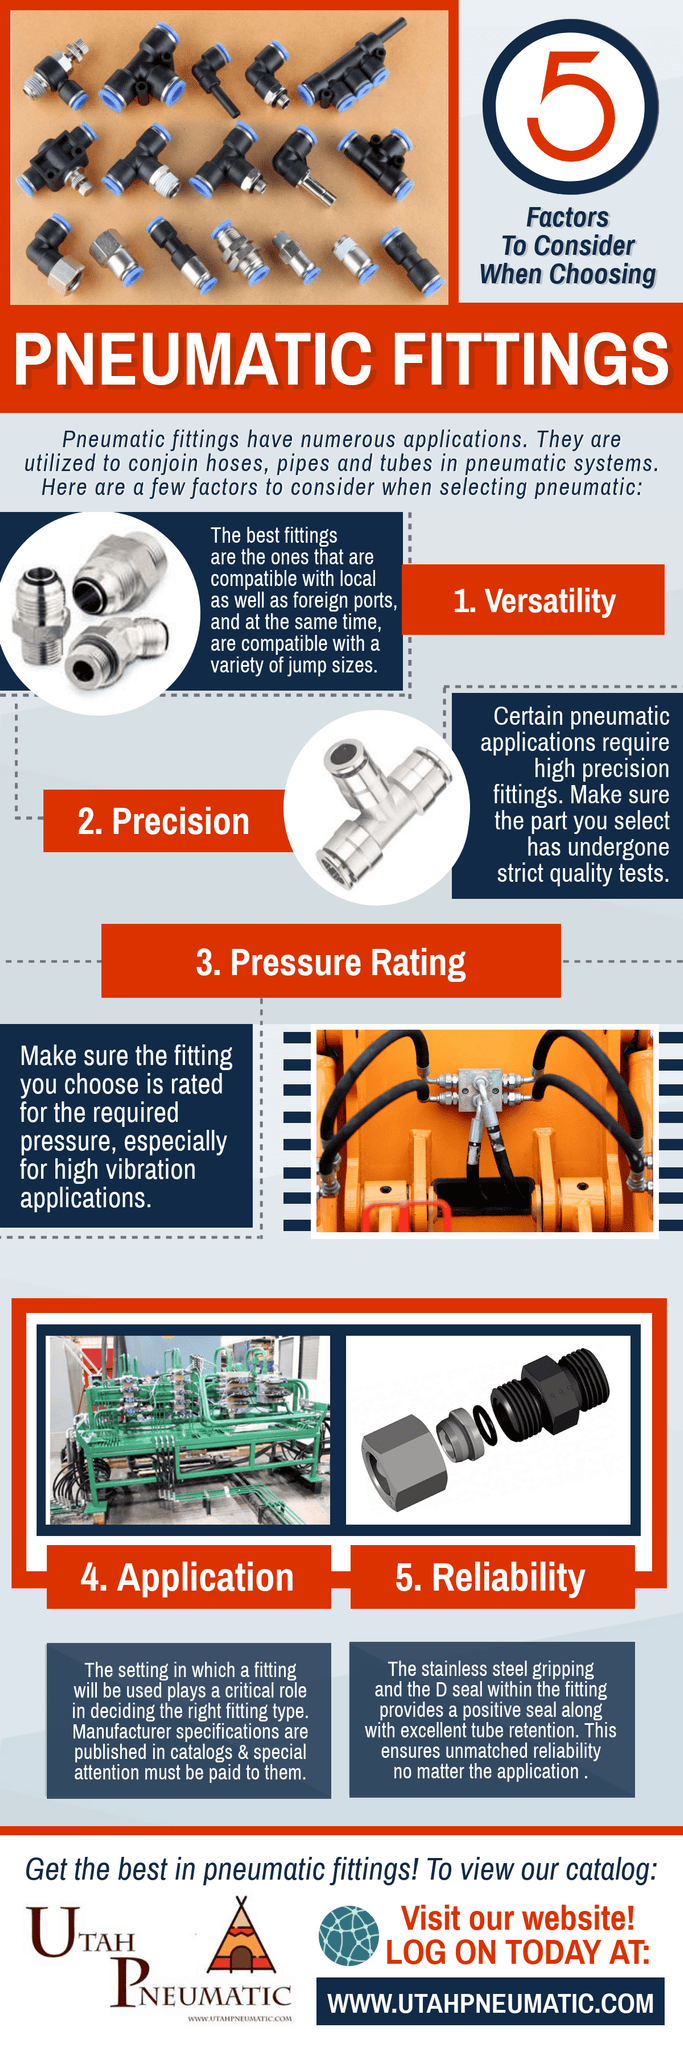 5 Factors To Consider When Choosing Pneumatic Fittings